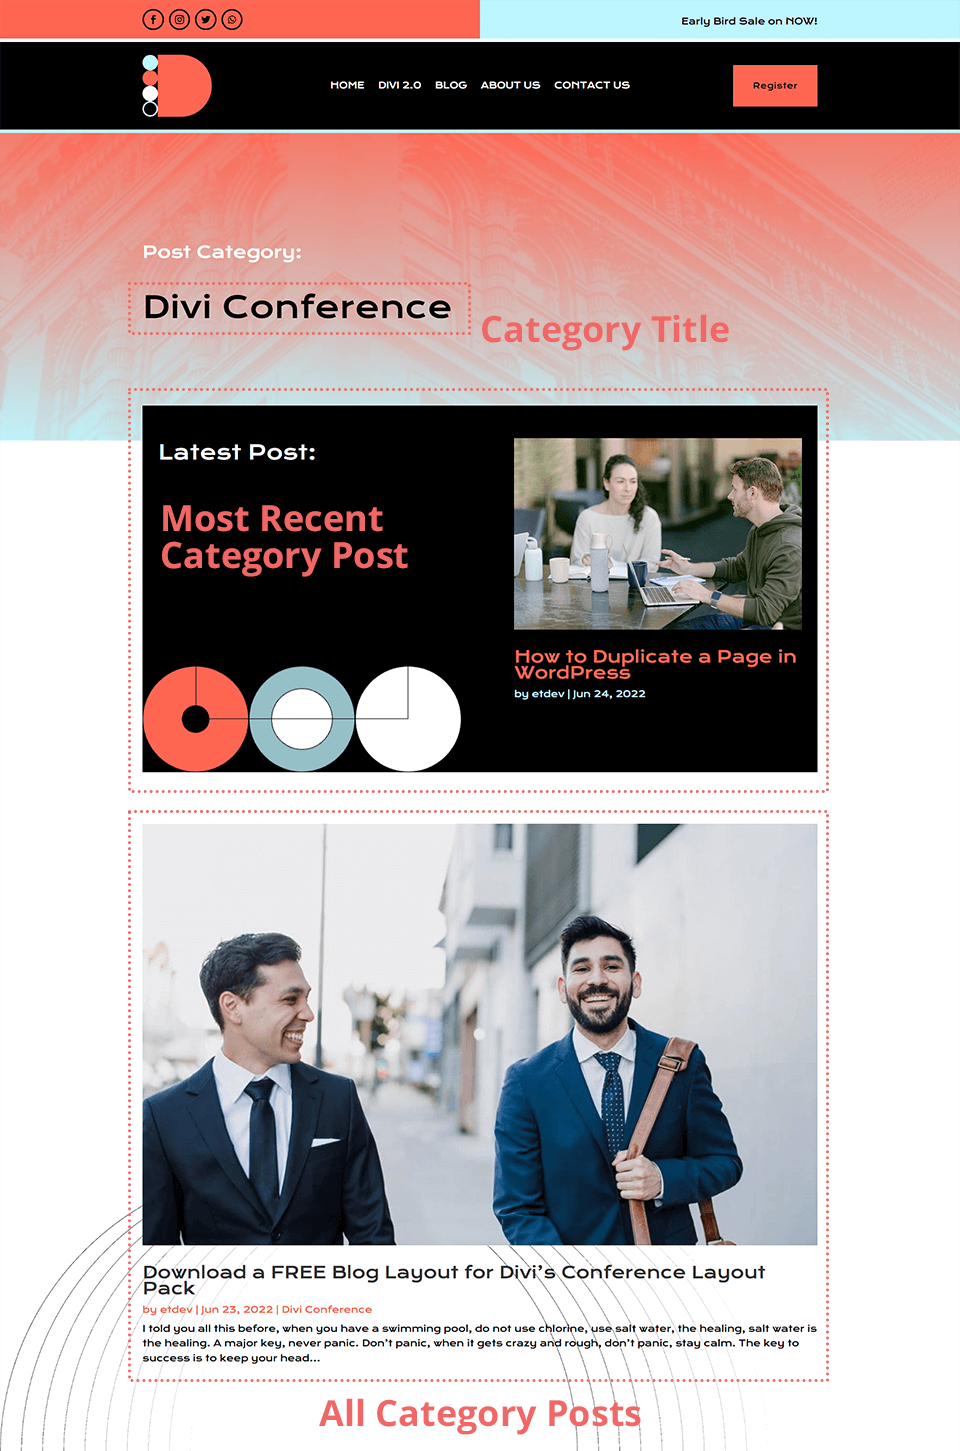 Showing the modules that automatically populate with content within the Divi Conference Category Layout